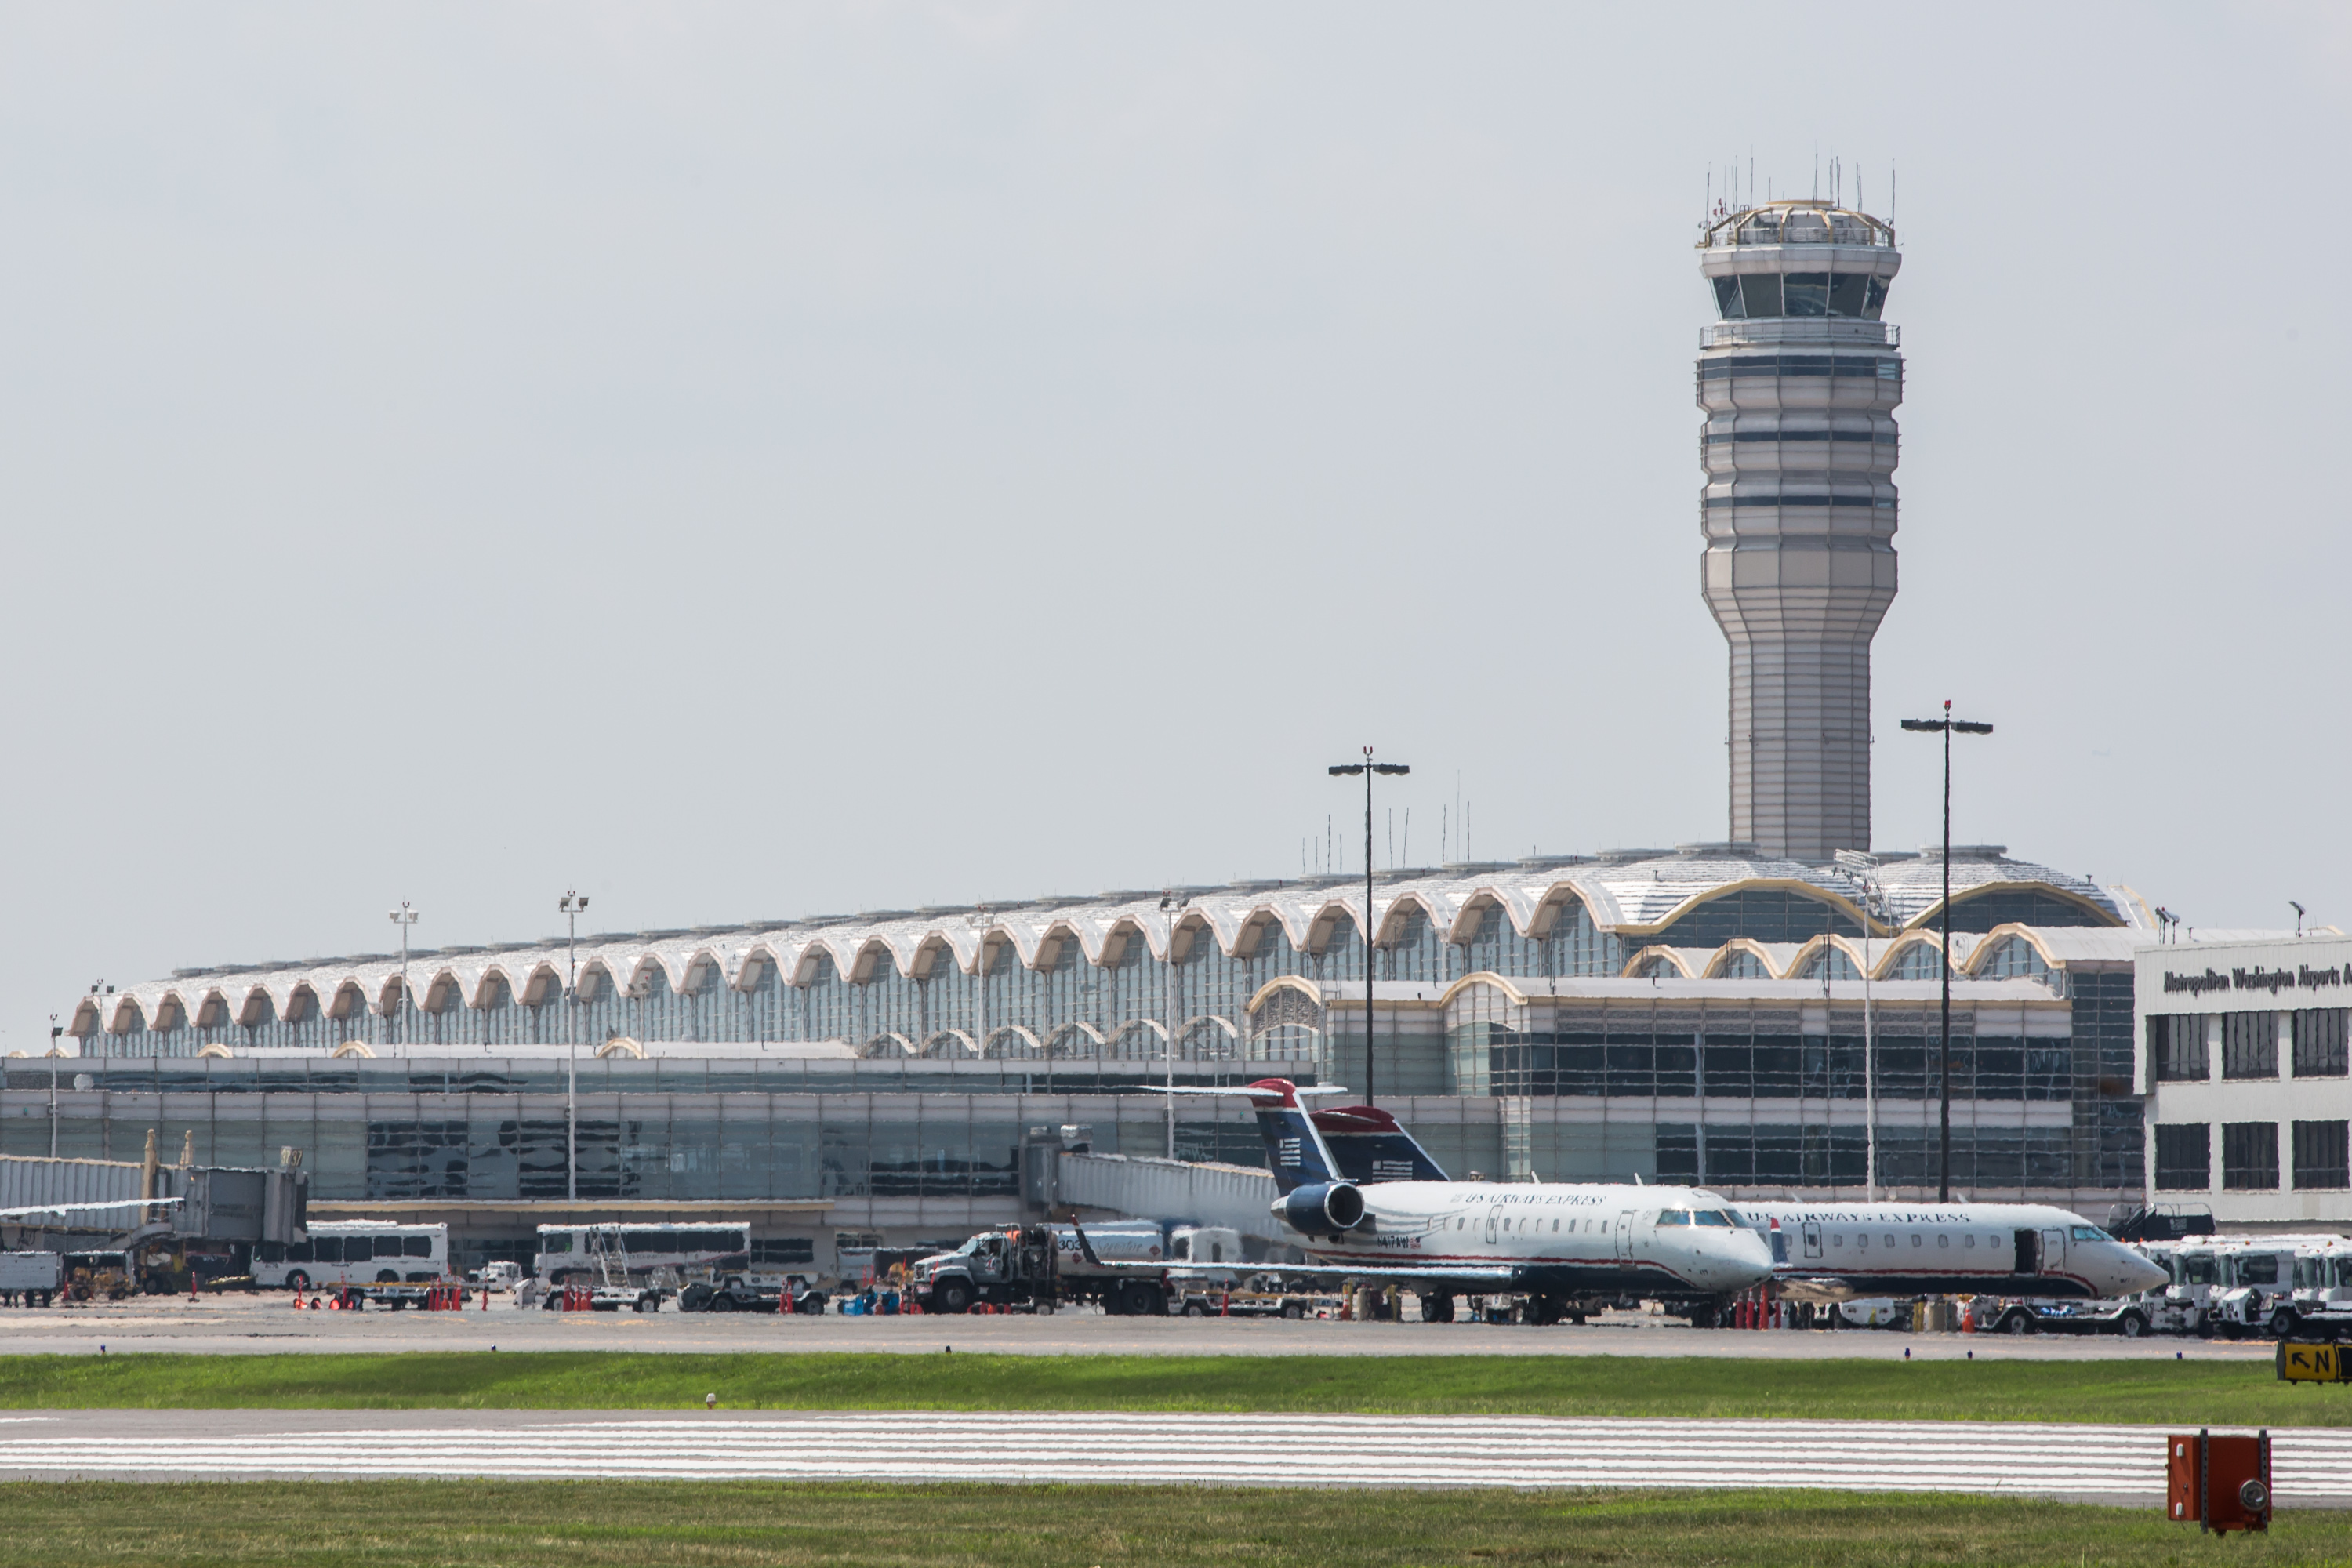 Reagan National construction likely to cause traffic backups